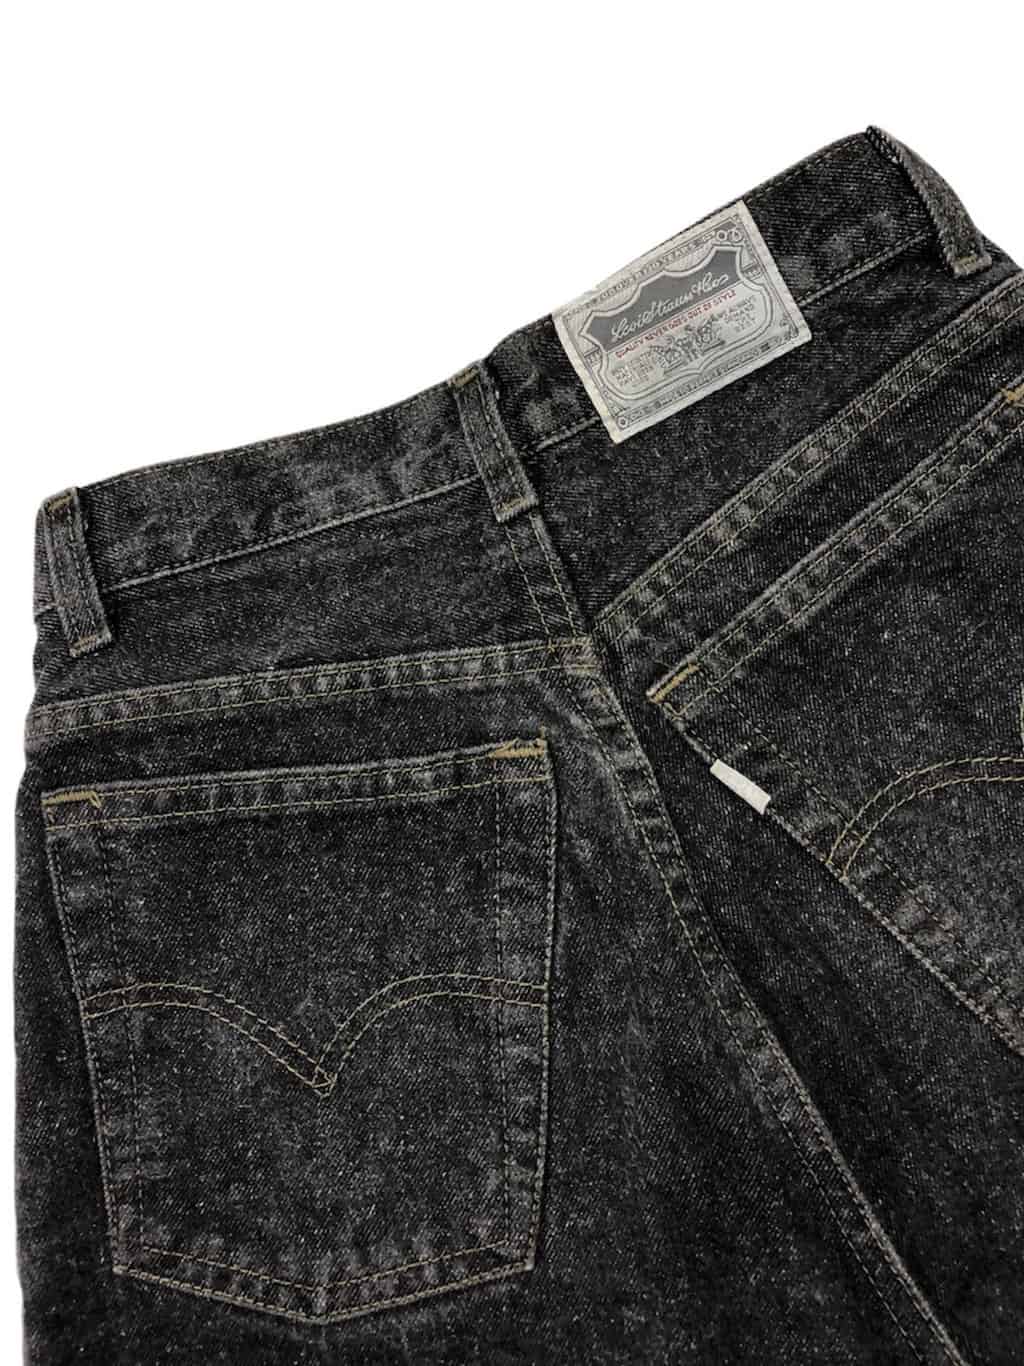 Vintage 1980s womens rare 961 Levis high rise jeans in charcoal grey with silver  tab - W26 x L32 - St Cyr Vintage